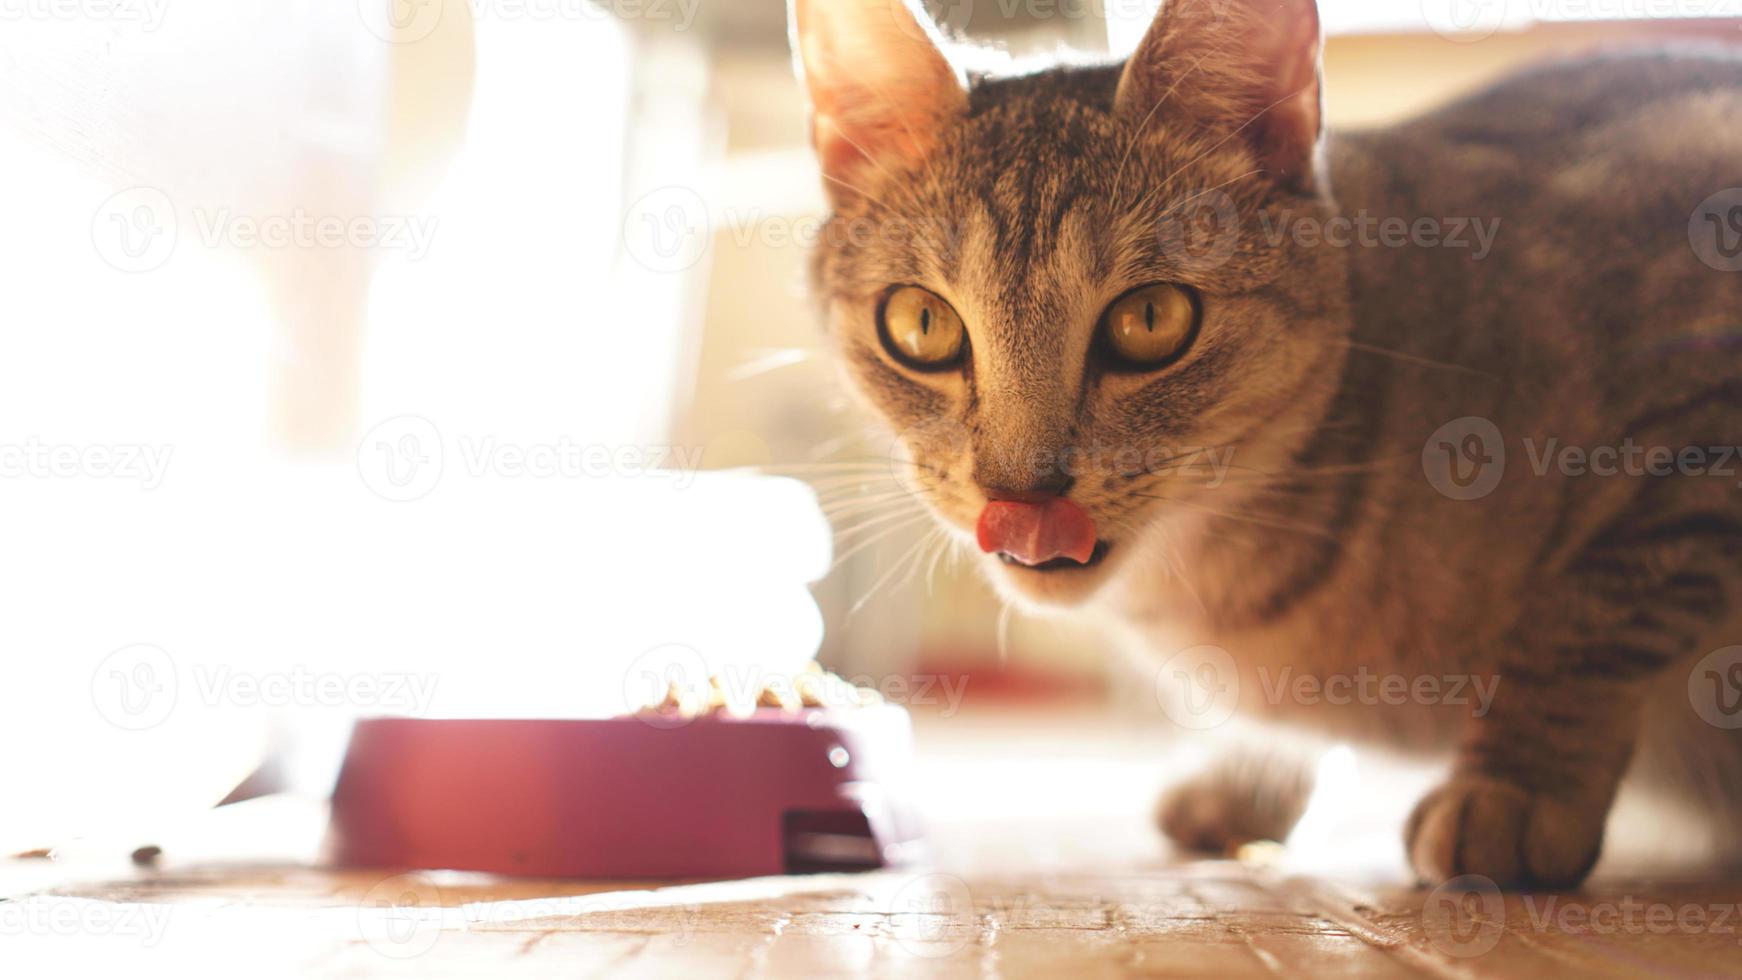 Kitten Lick lips with tongue Tasty. Cat licks his teeth after eating photo